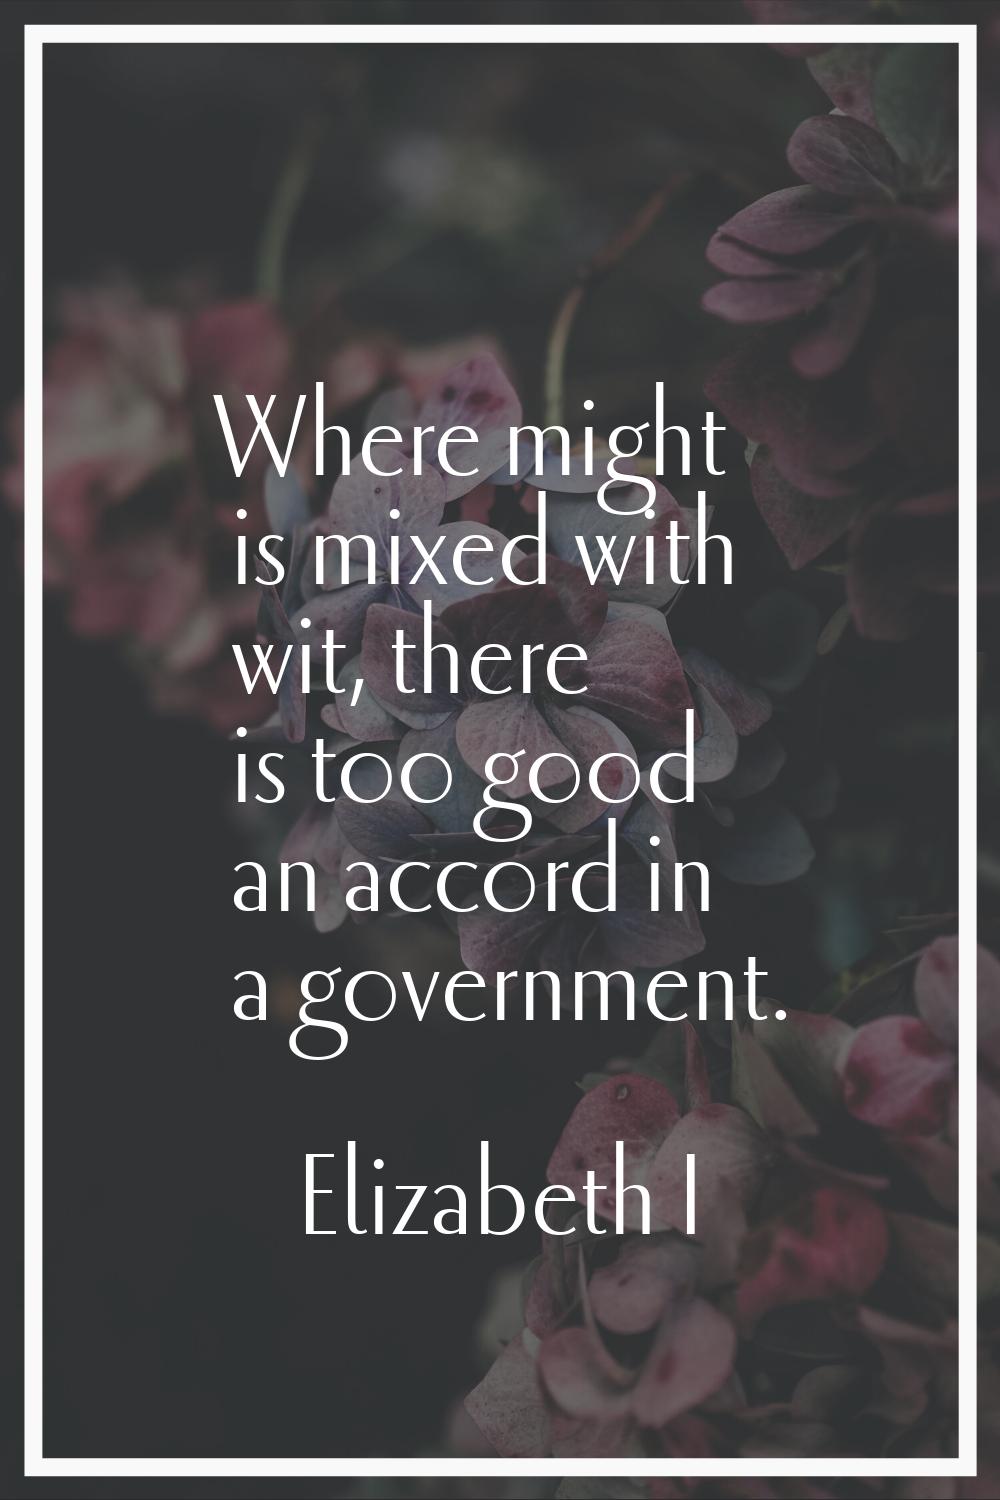 Where might is mixed with wit, there is too good an accord in a government.